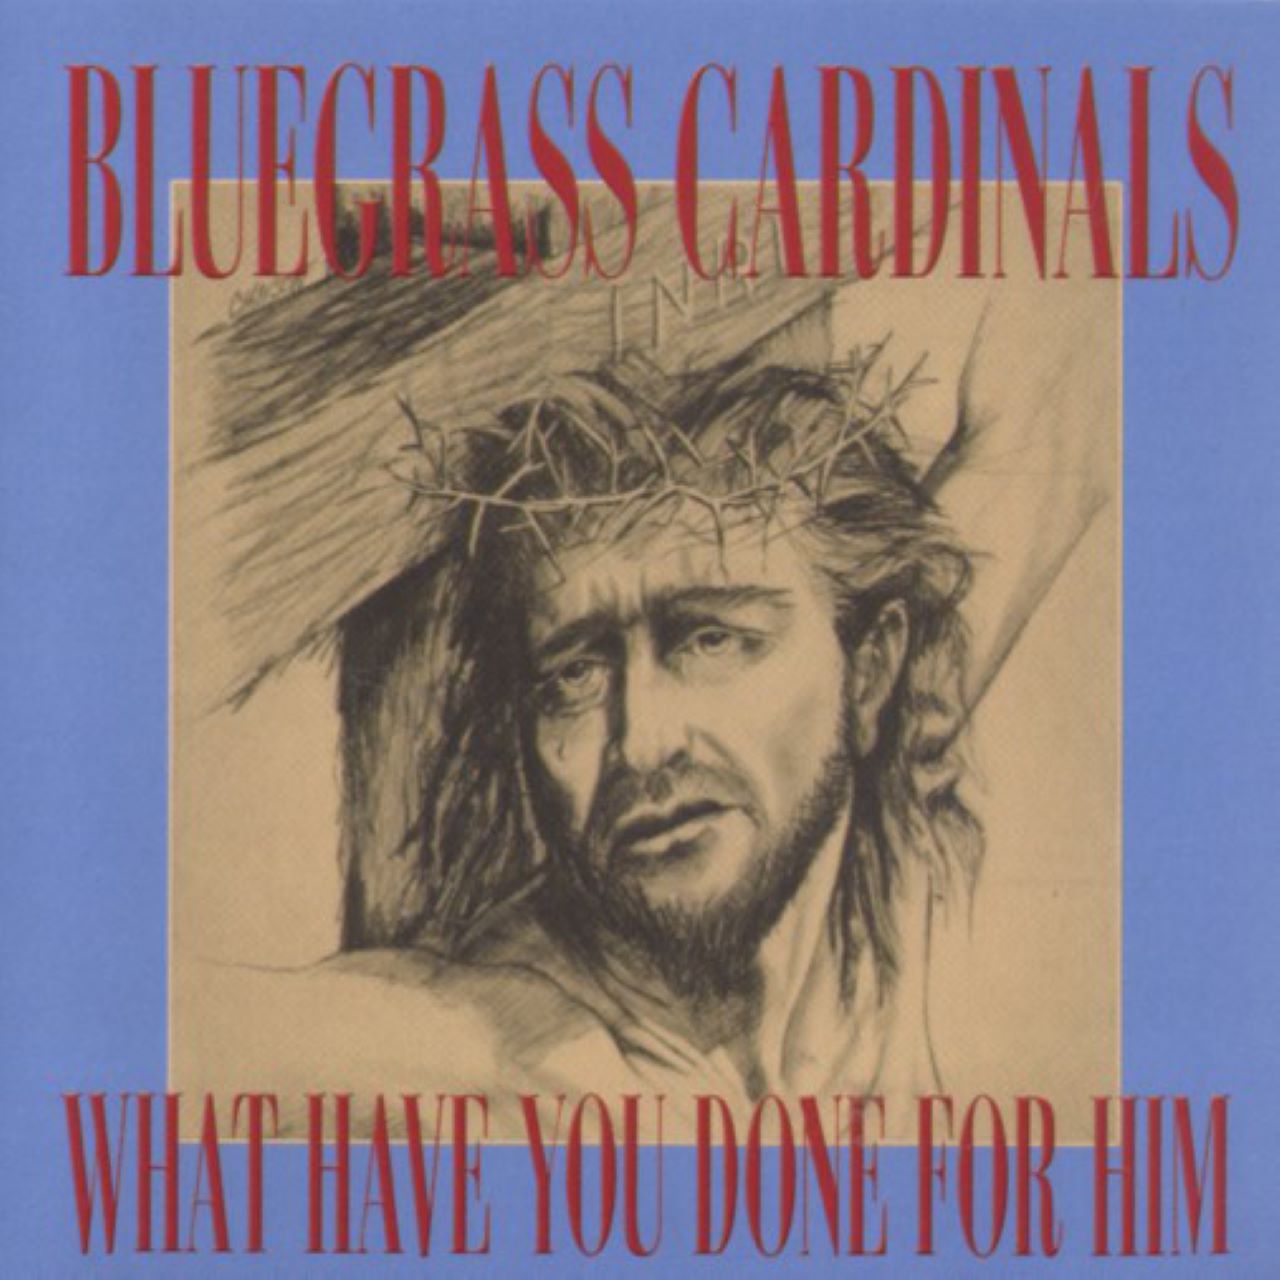 Bluegrass Cardinals - What Have You Done For Him cover album